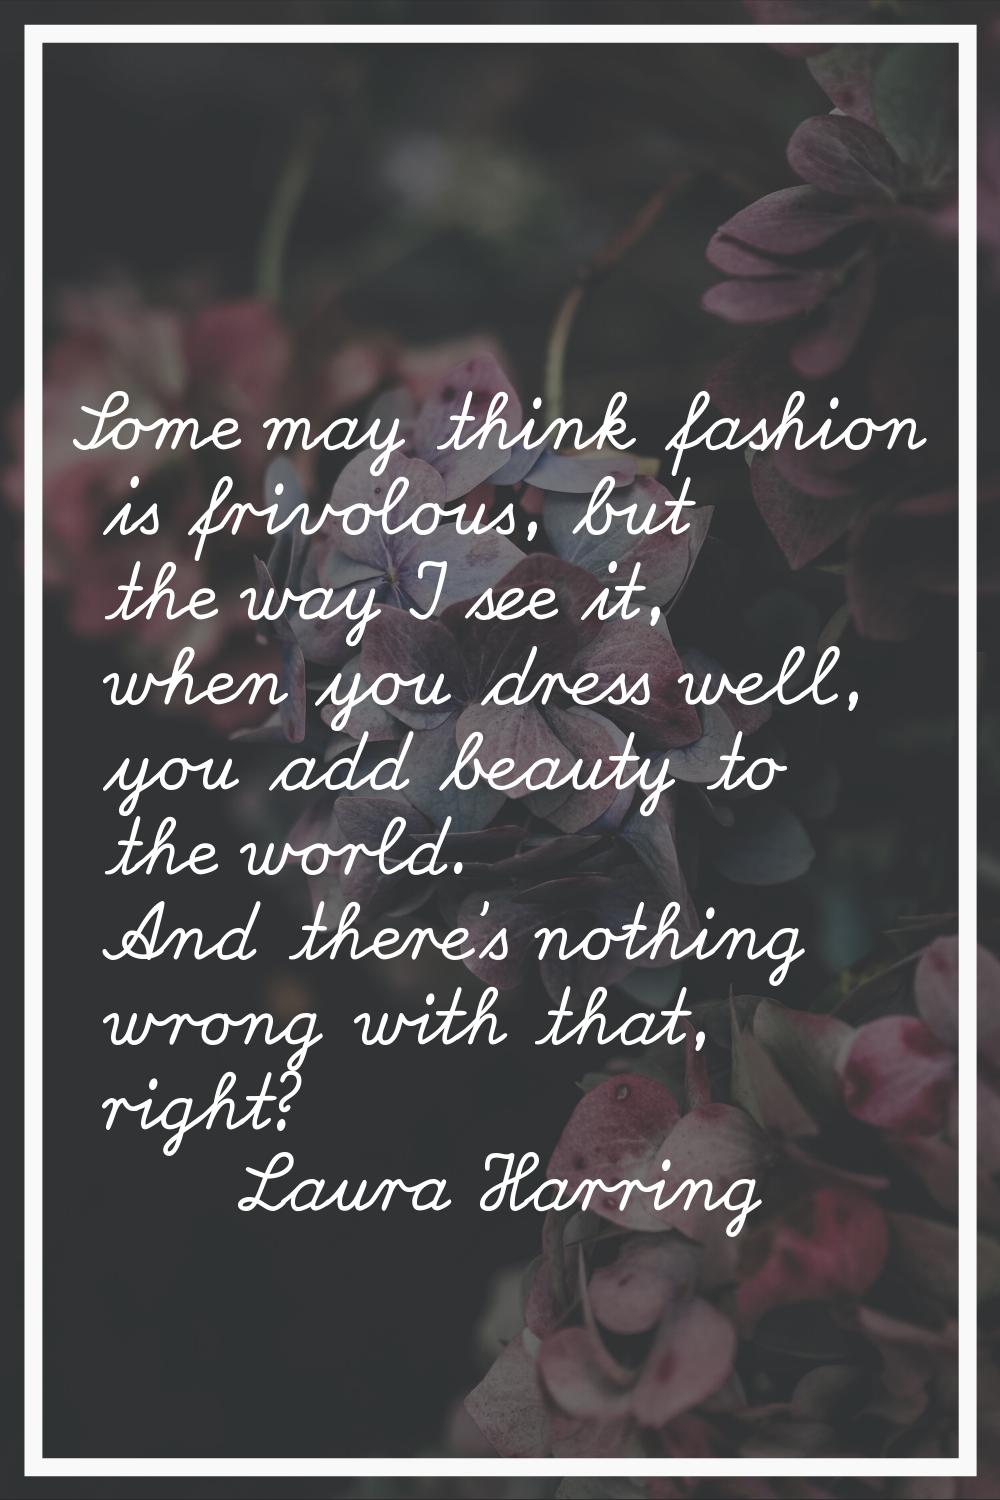 Some may think fashion is frivolous, but the way I see it, when you dress well, you add beauty to t